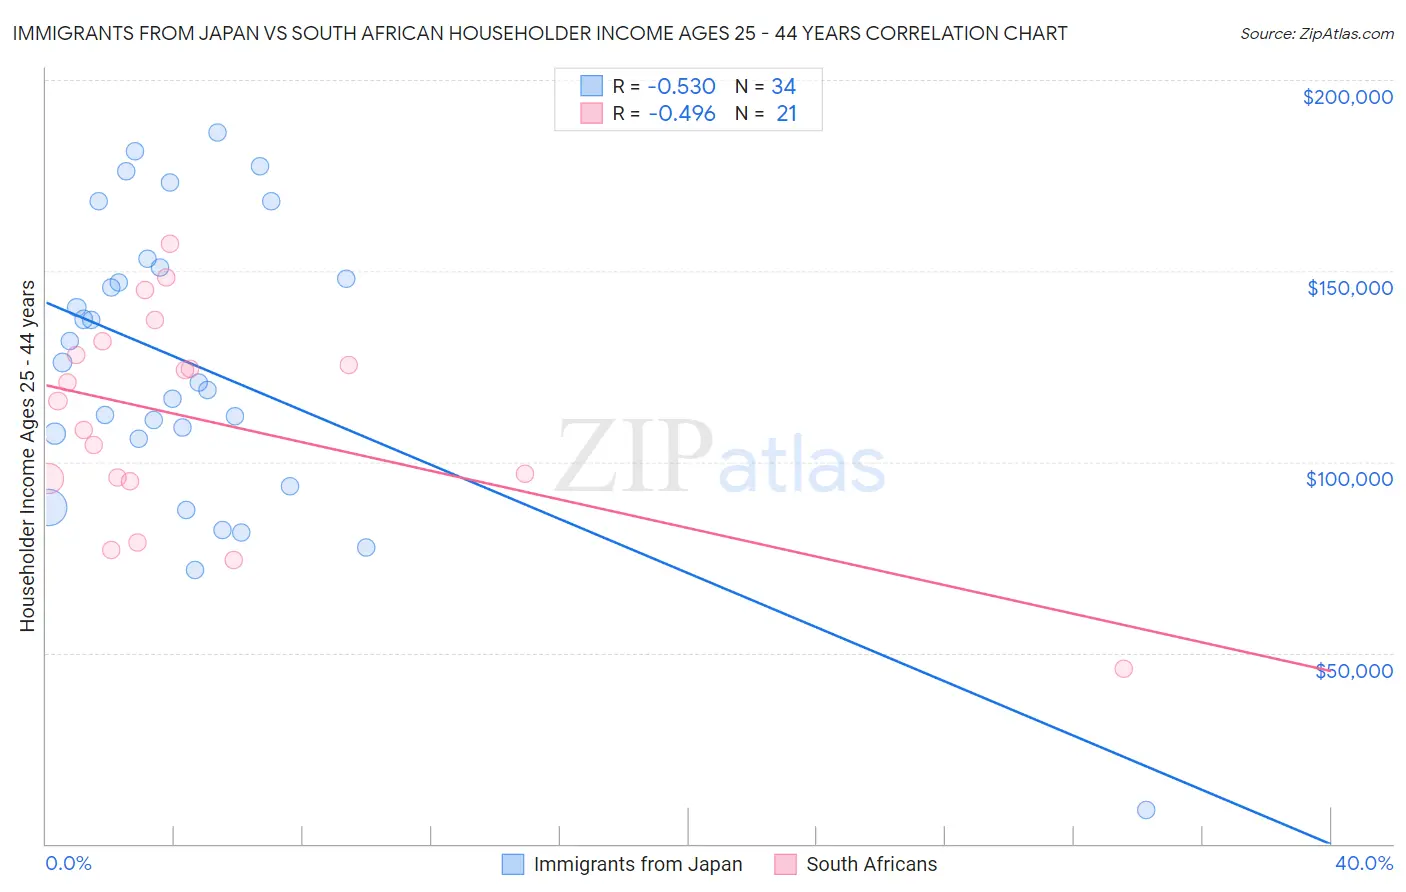 Immigrants from Japan vs South African Householder Income Ages 25 - 44 years